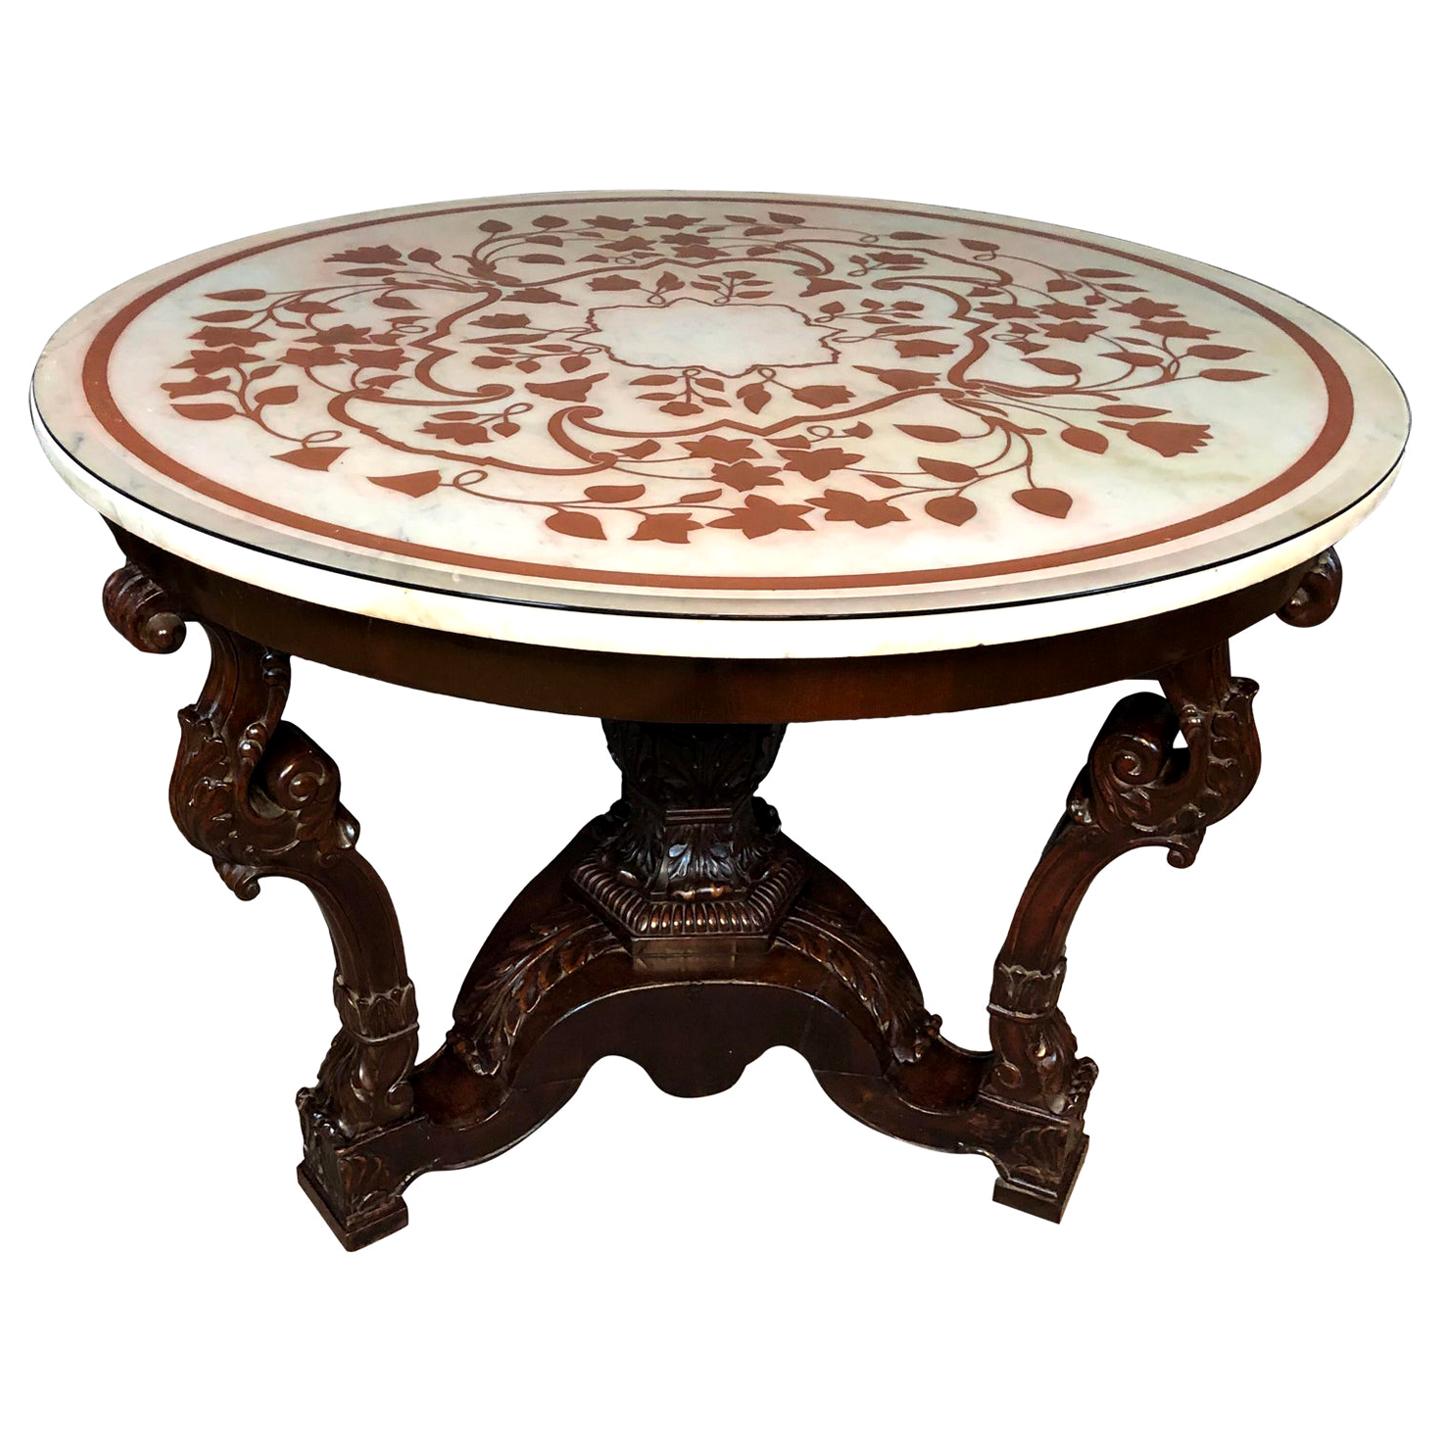 Italian Scagliola White Marble-Top Carved Wood Center Table, 19th Century 